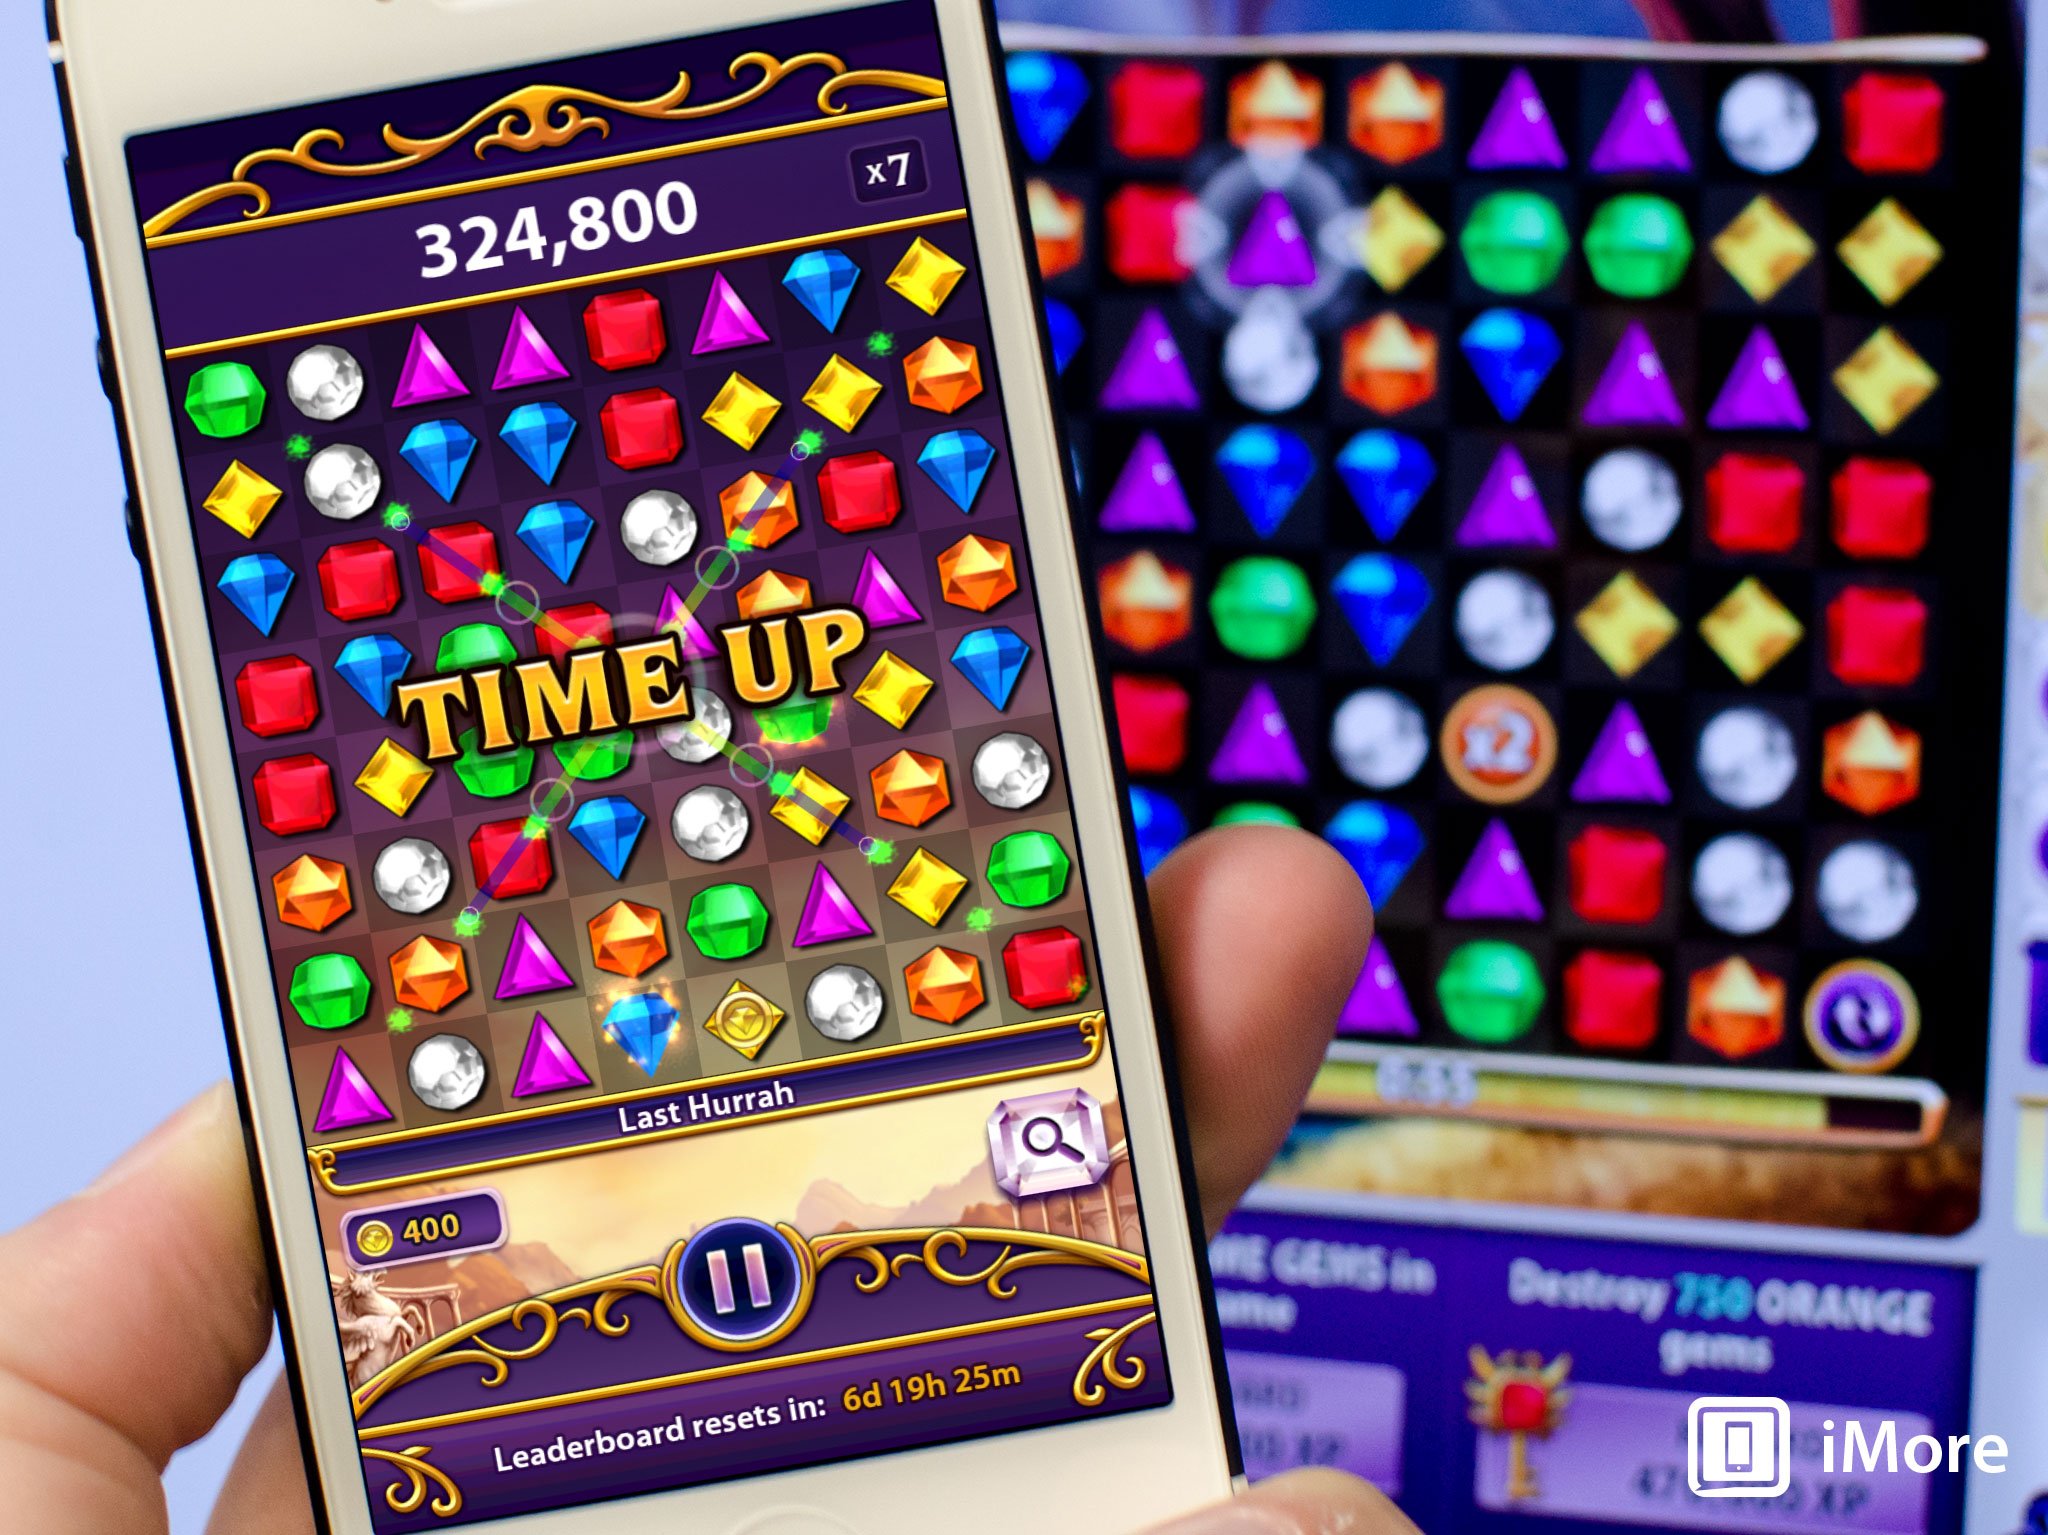 Bejeweled Blitz: Top 8 tips, hints, and cheats to get your highest